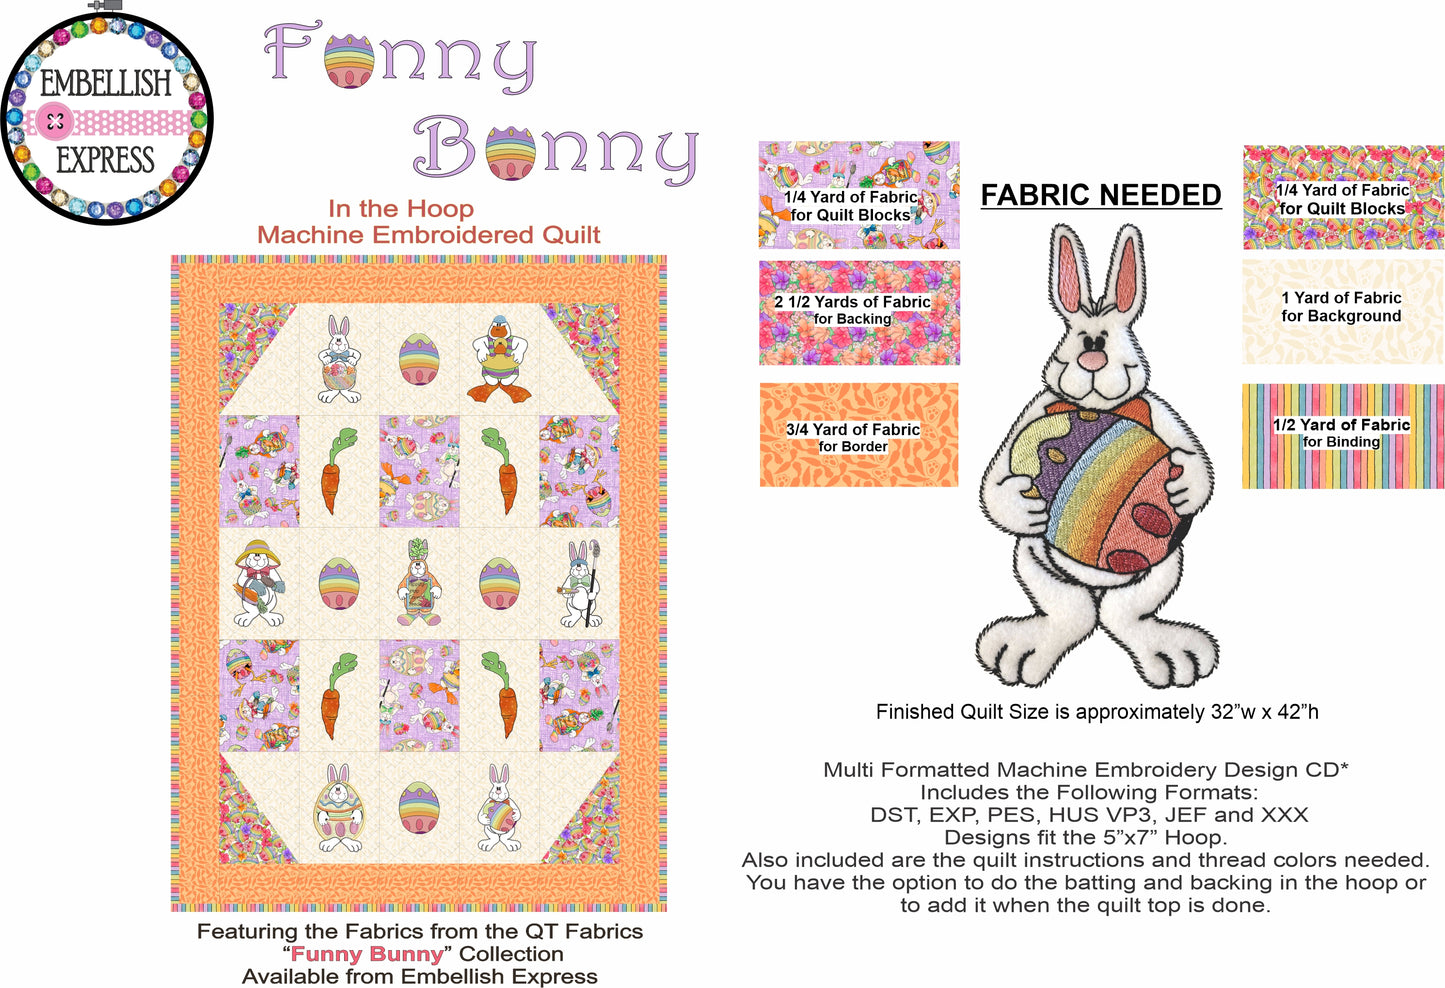 Funny Bunny Machine Embroidery Quilt CD